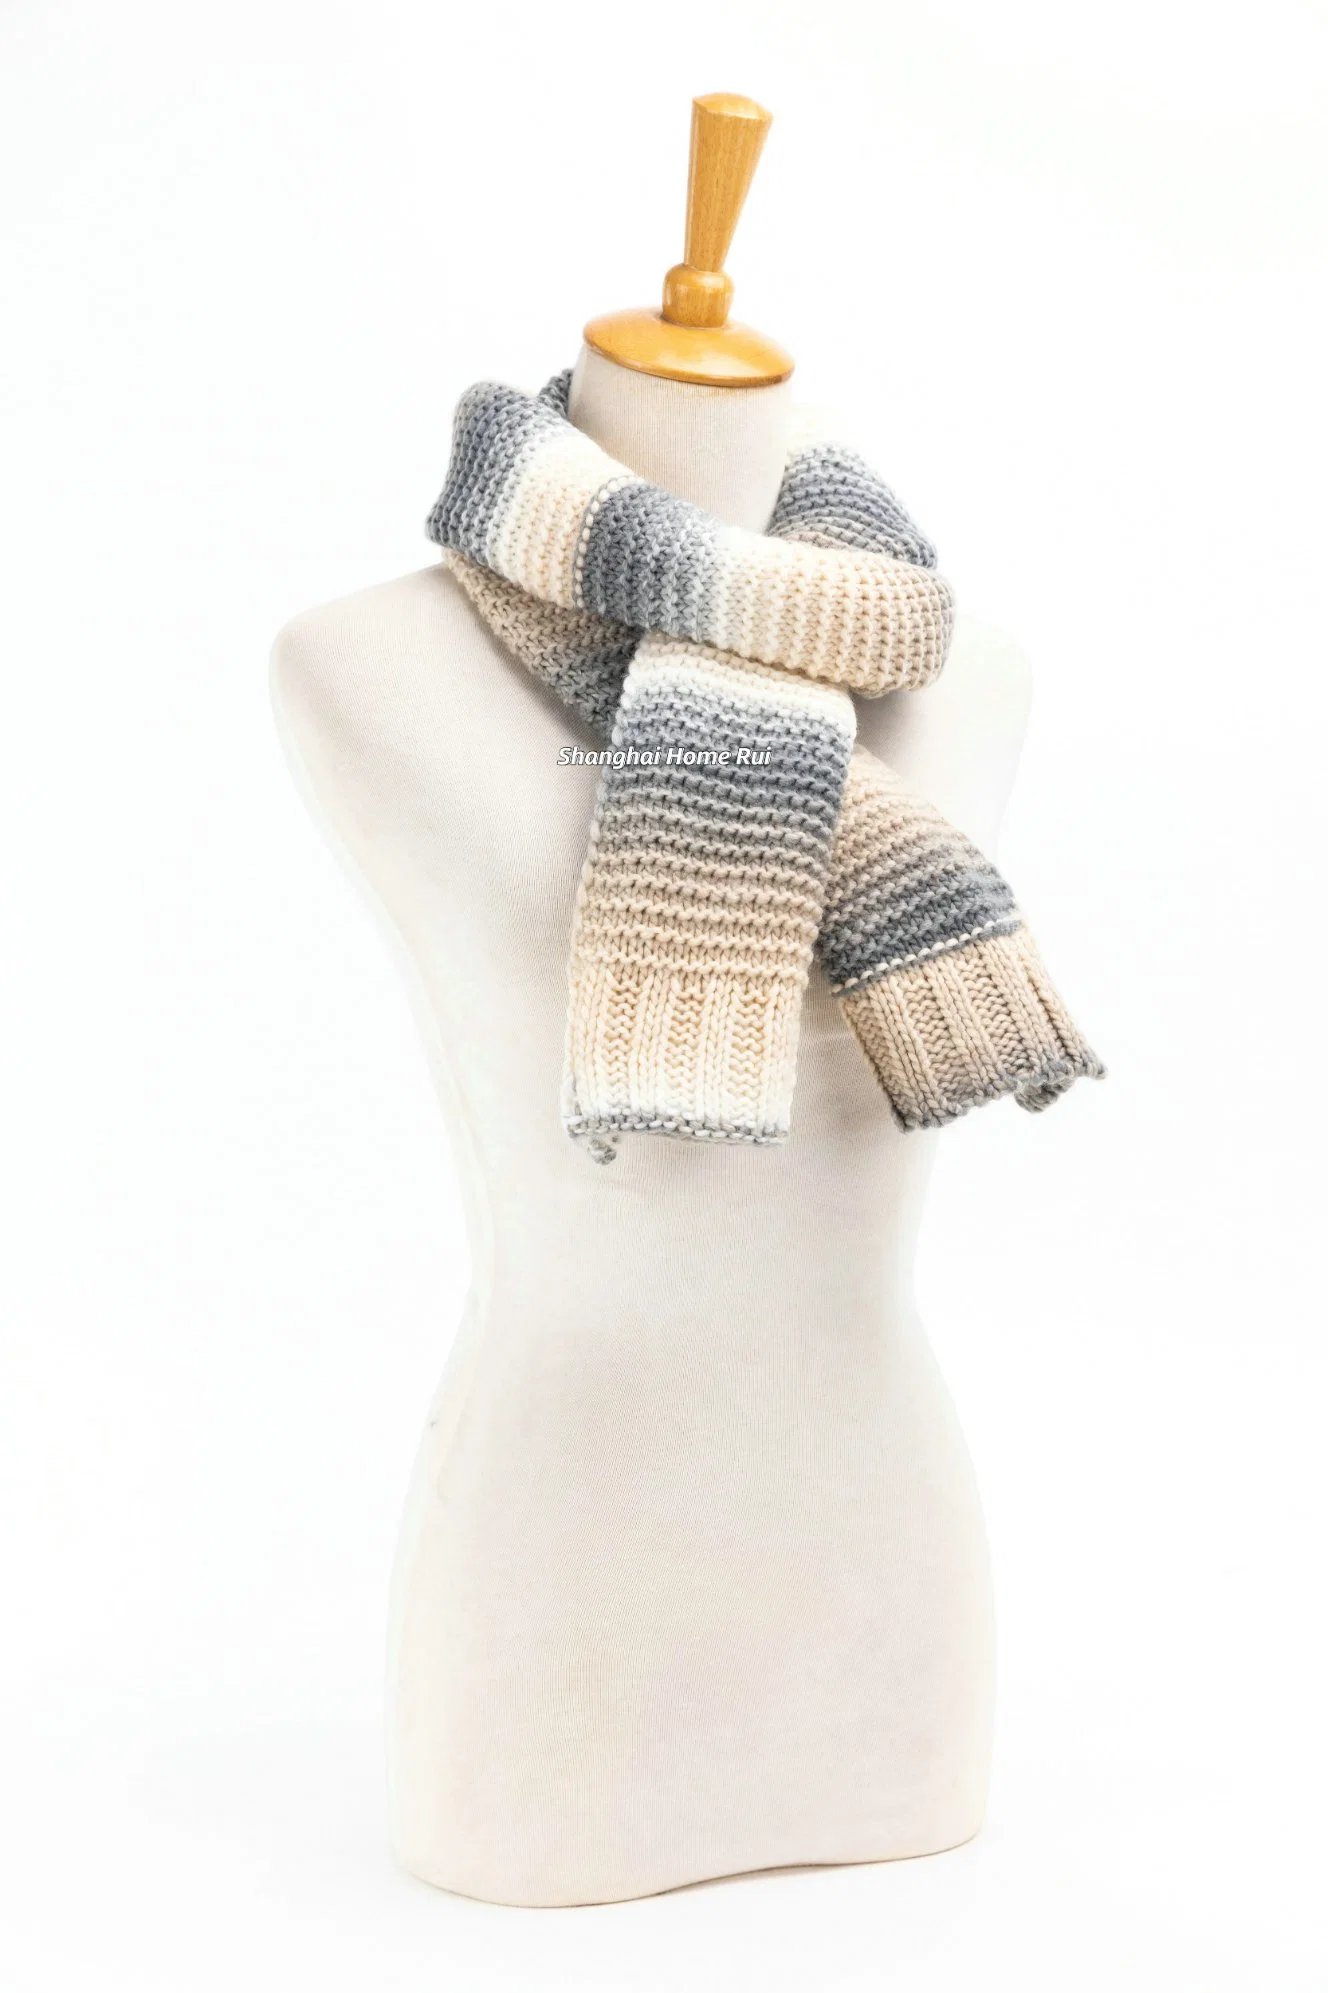 Home Rui Wholesale/Supplier Outerwear Apparel Accessory Unisex Winter Warmth Beige Acrylic Cashmere Feel Chunky Cozy Fabulous Varigated Striped Blanket Scarf